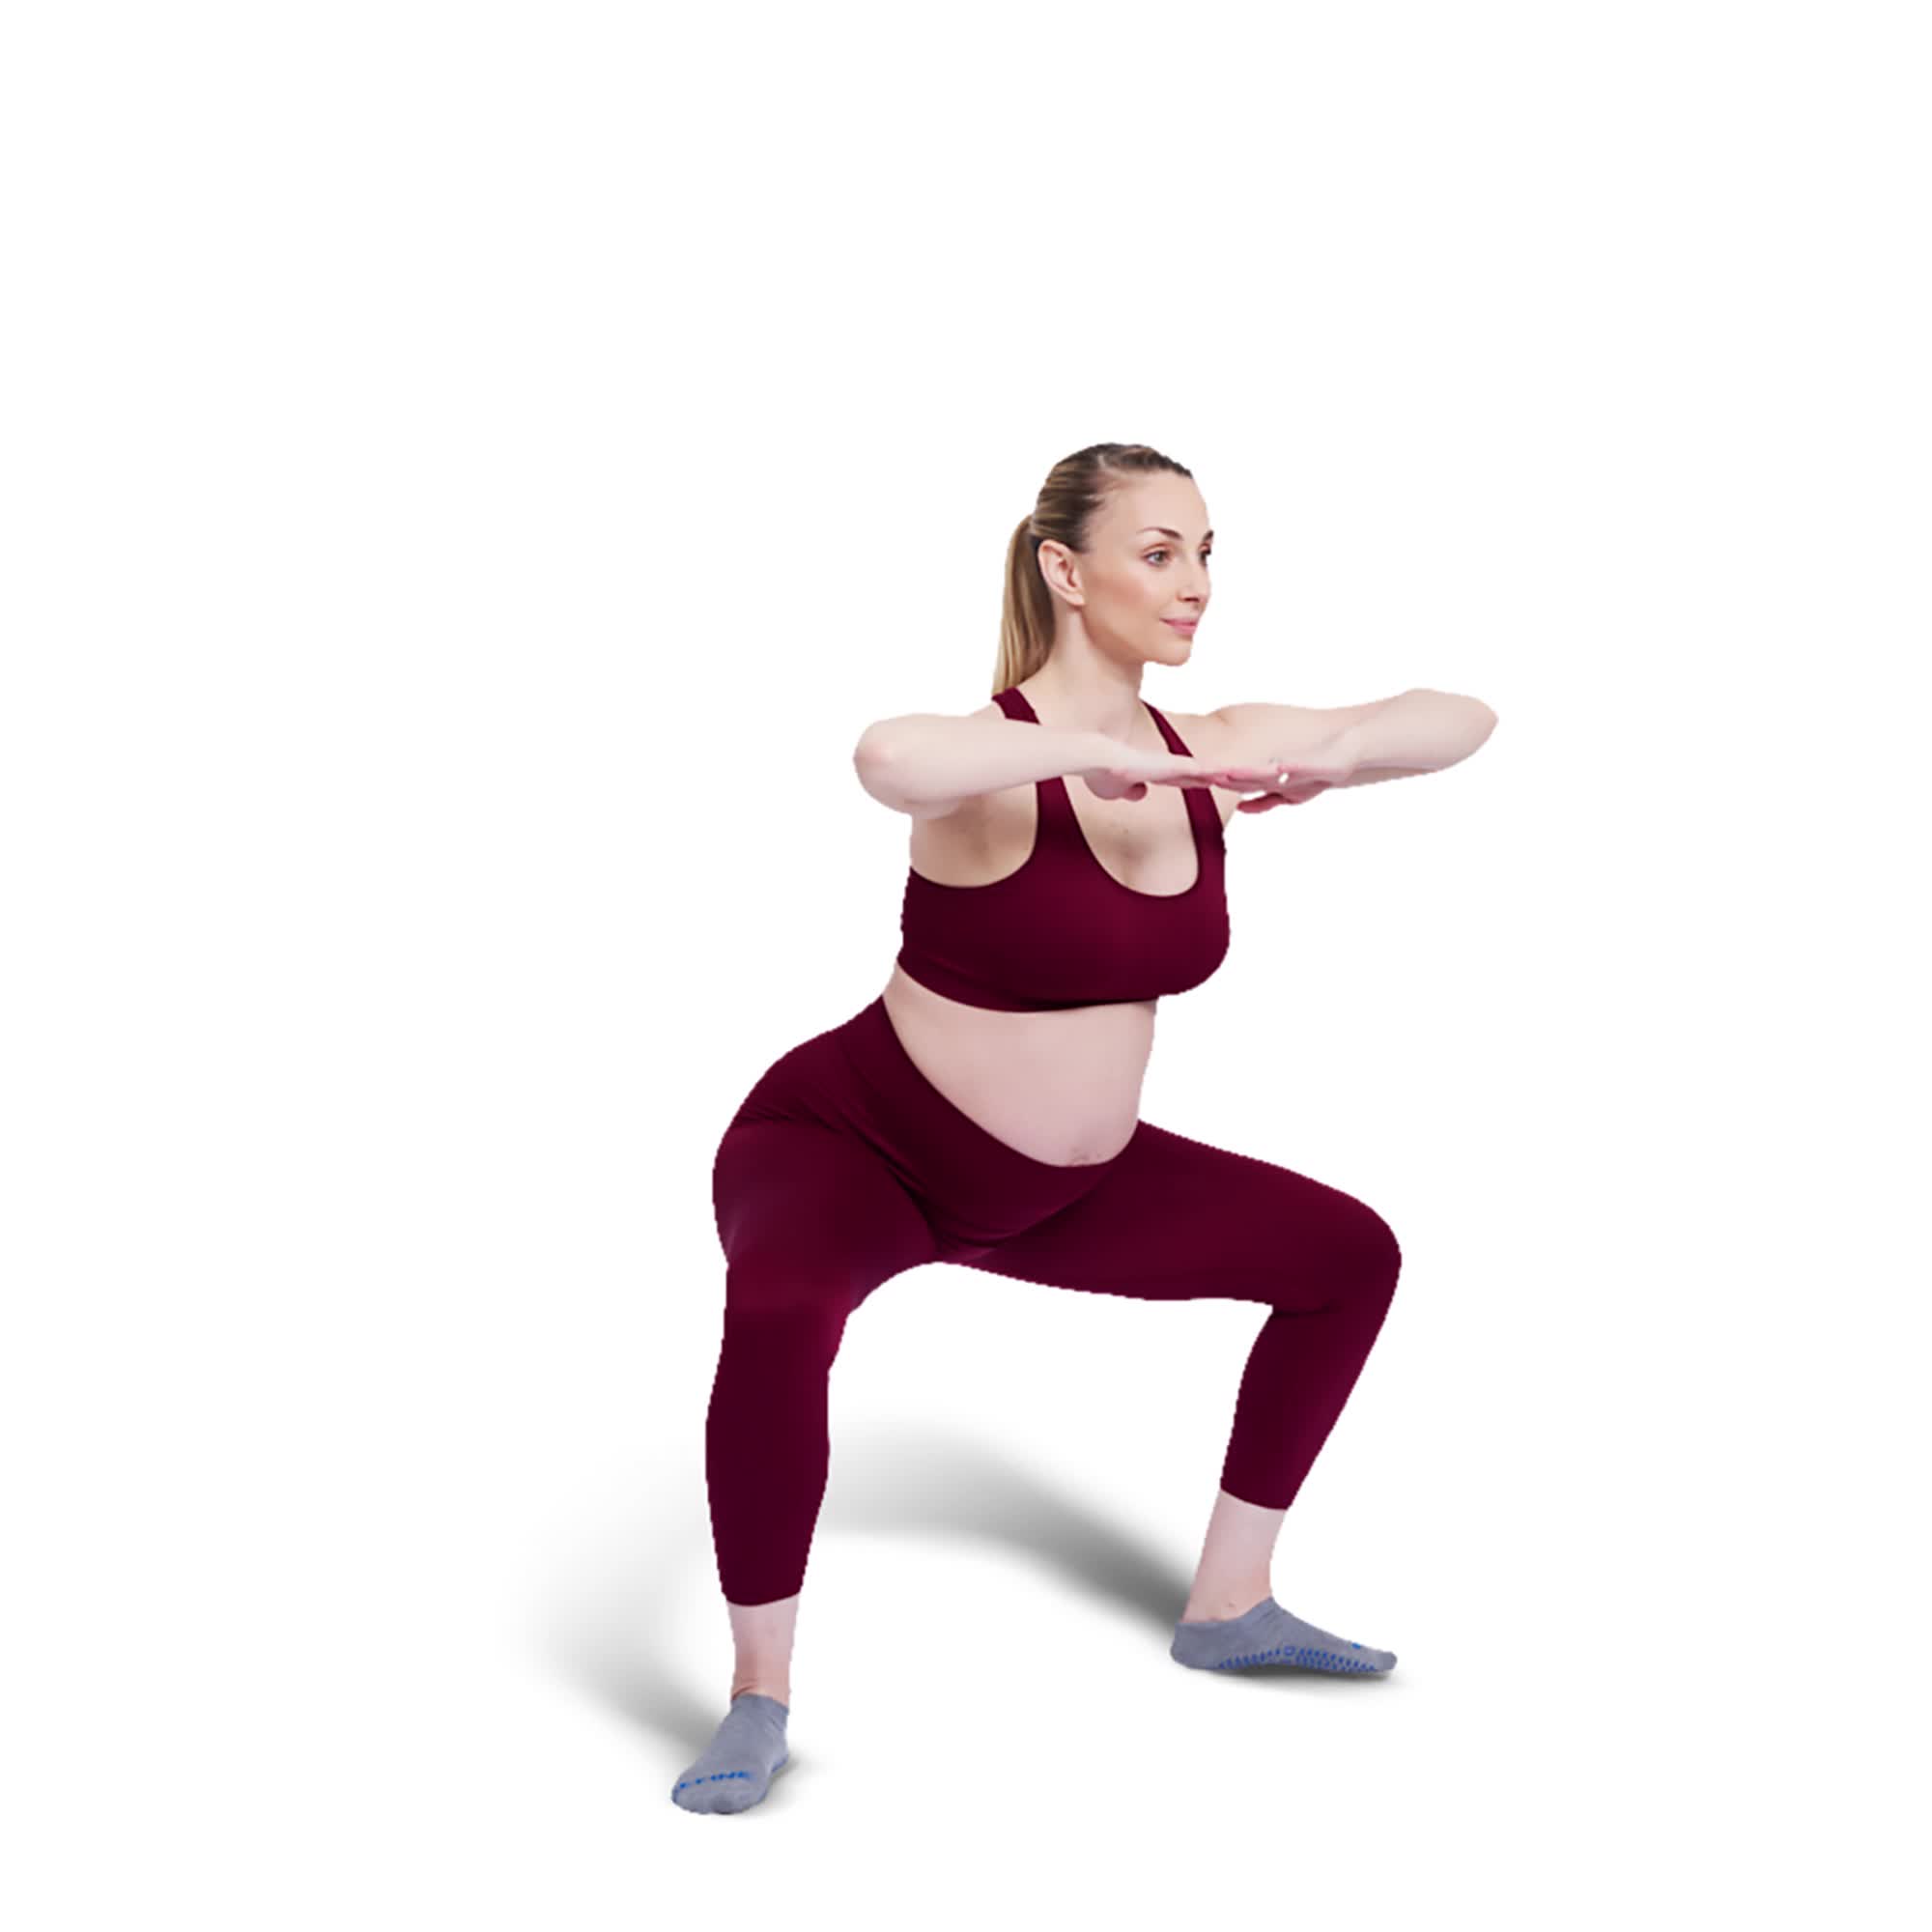 Pregnancy Fitness: Staying healthy and safe with a Pregnancy Work-Out (workout  videos below)